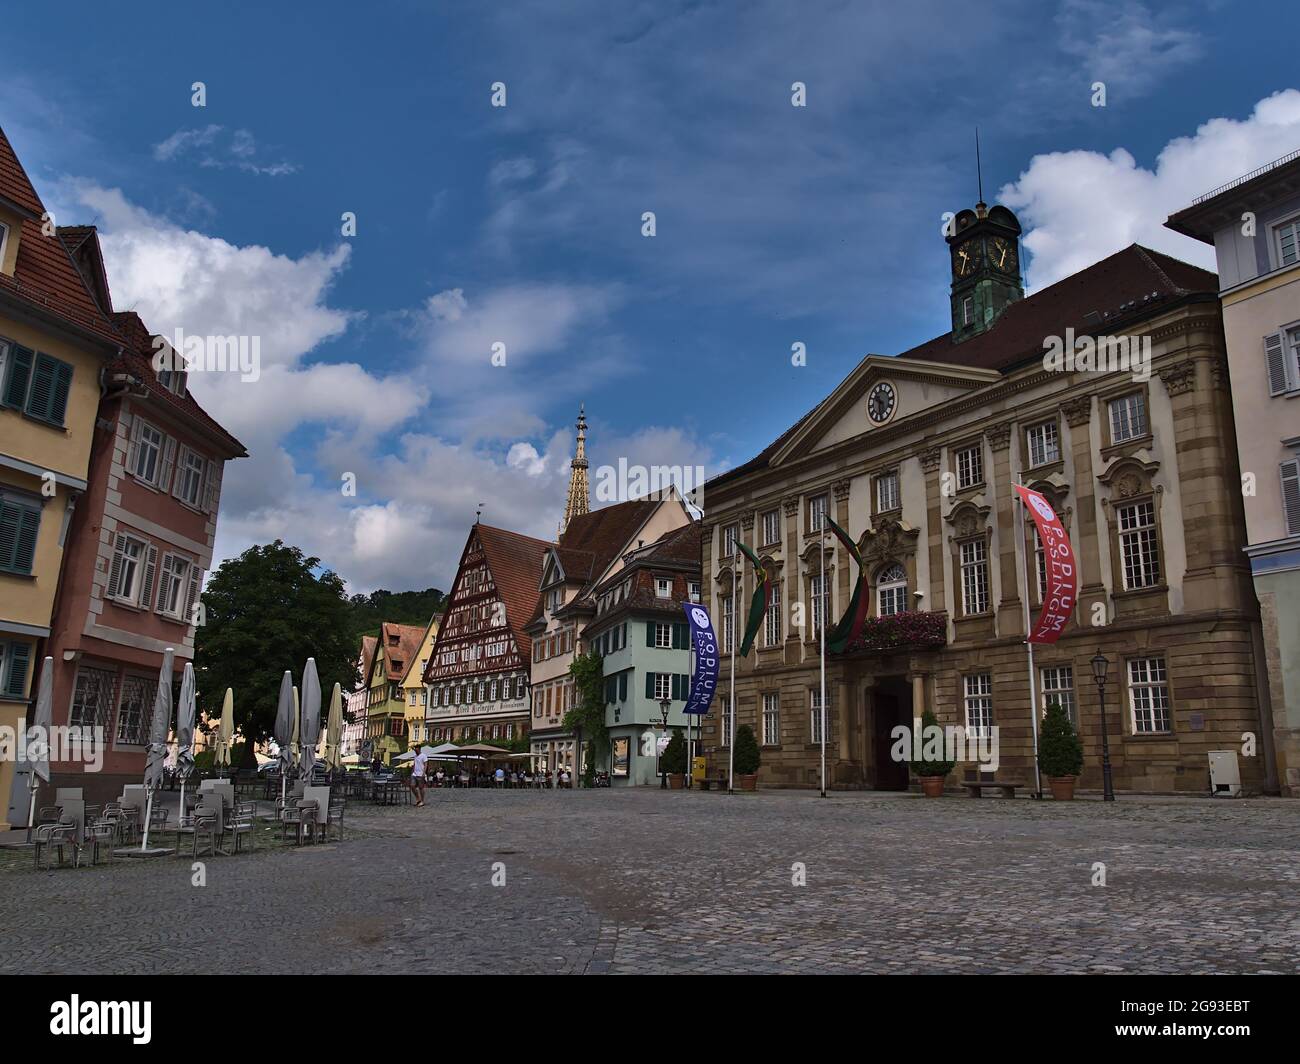 Historic square Rathausplatz with cobblestone and old buildings on cloudy summer day. Stock Photo